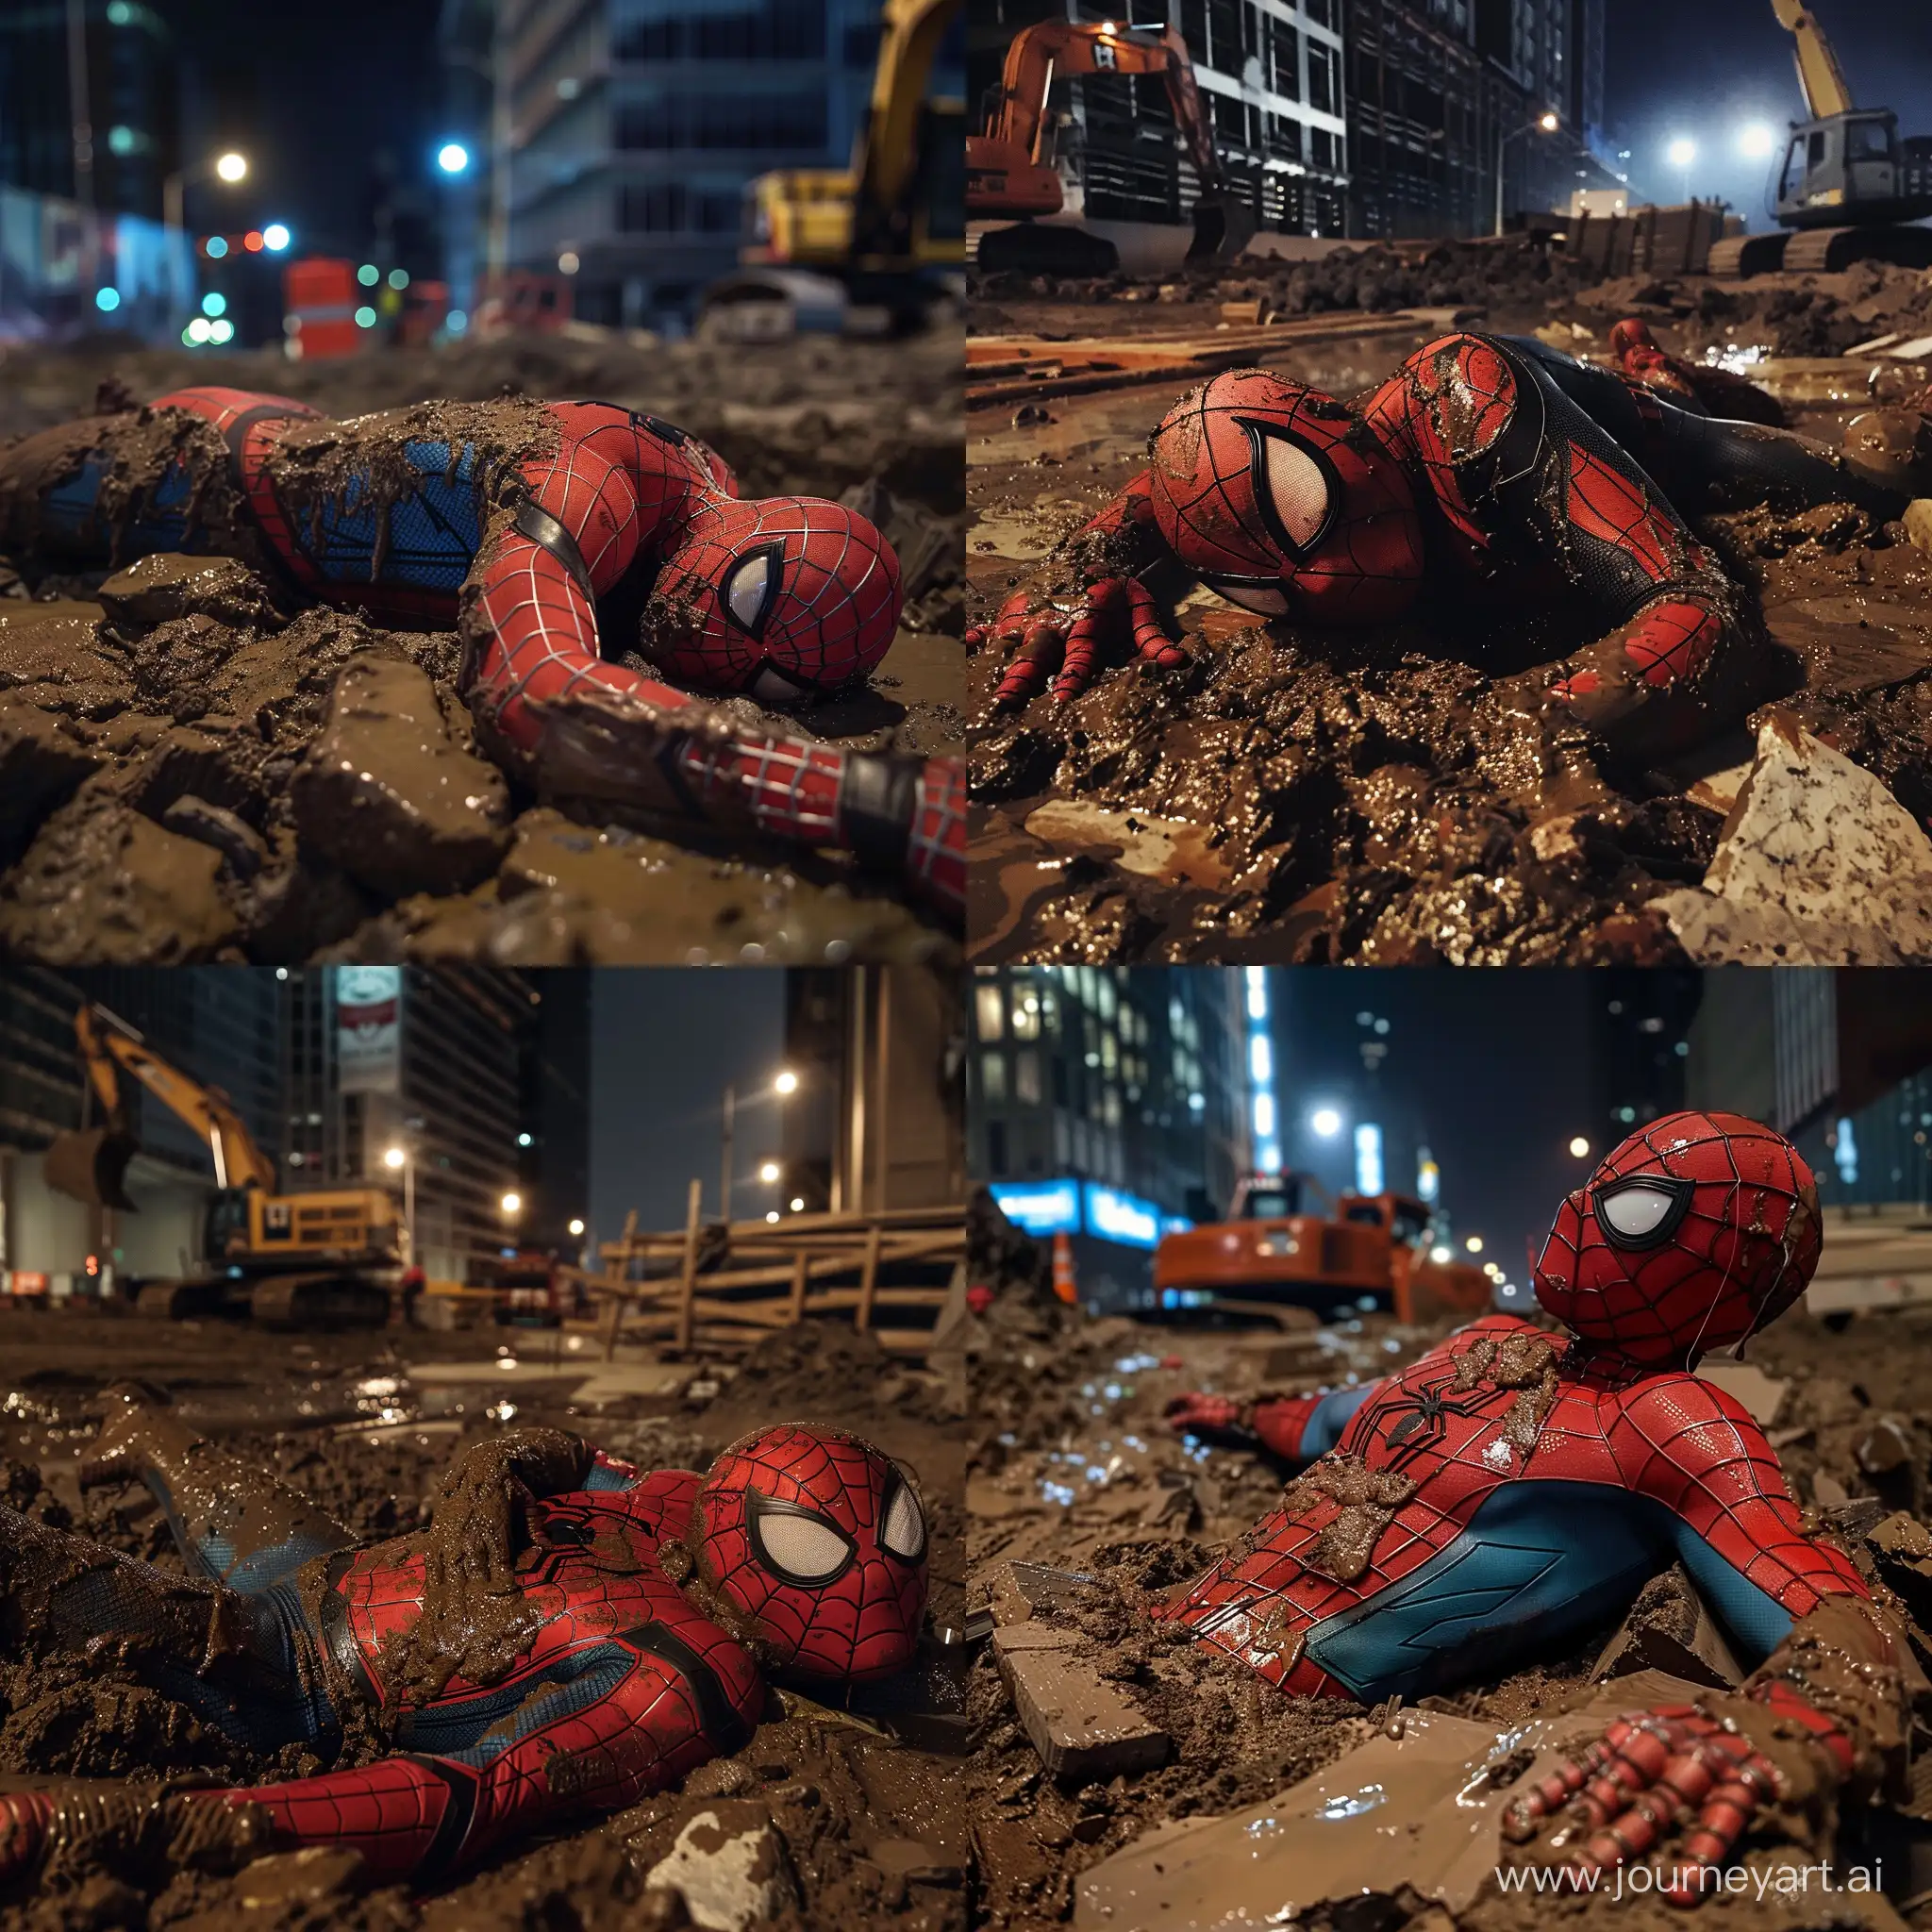 Spiderman-Unconscious-in-Mud-at-Night-Construction-Site